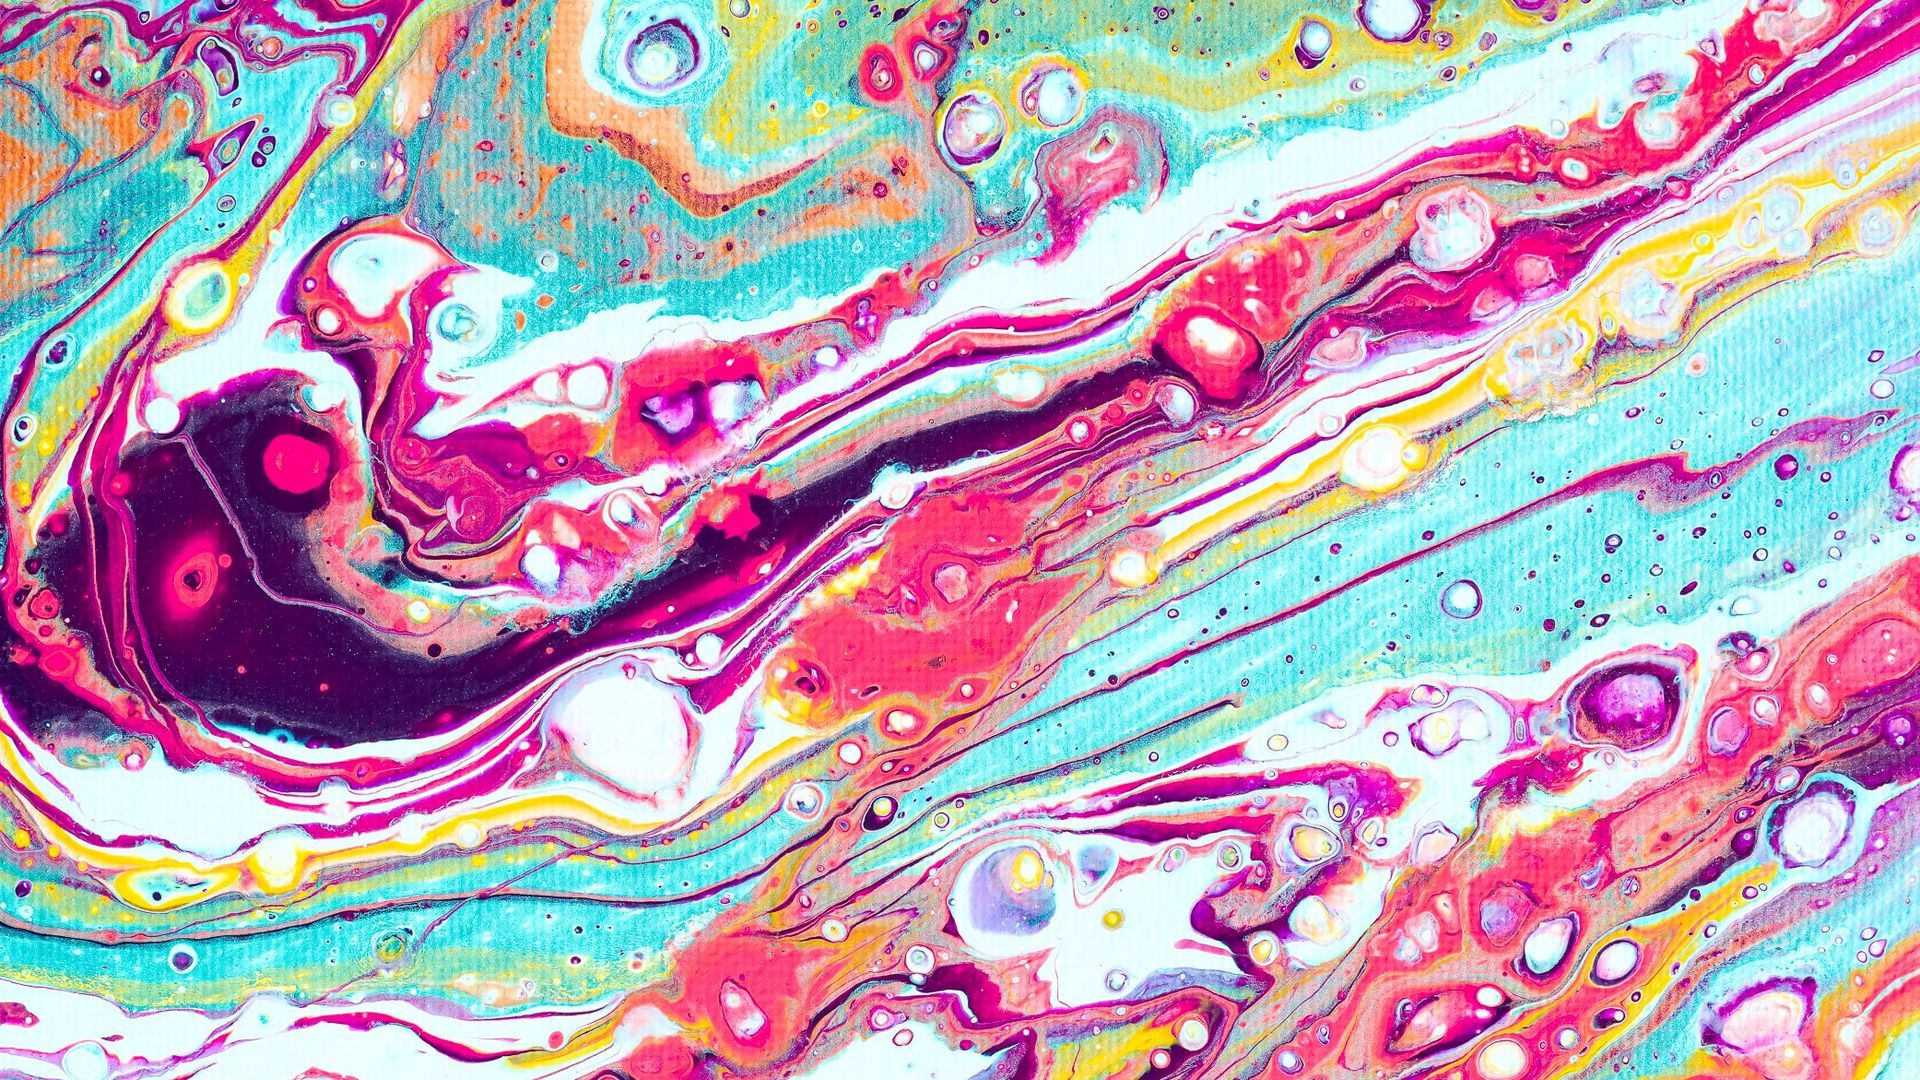 Download wallpaper 1920x1080 paint, fluid art, stains, liquid, colorful, canvas full hd, hdtv, fhd, 1080p HD background